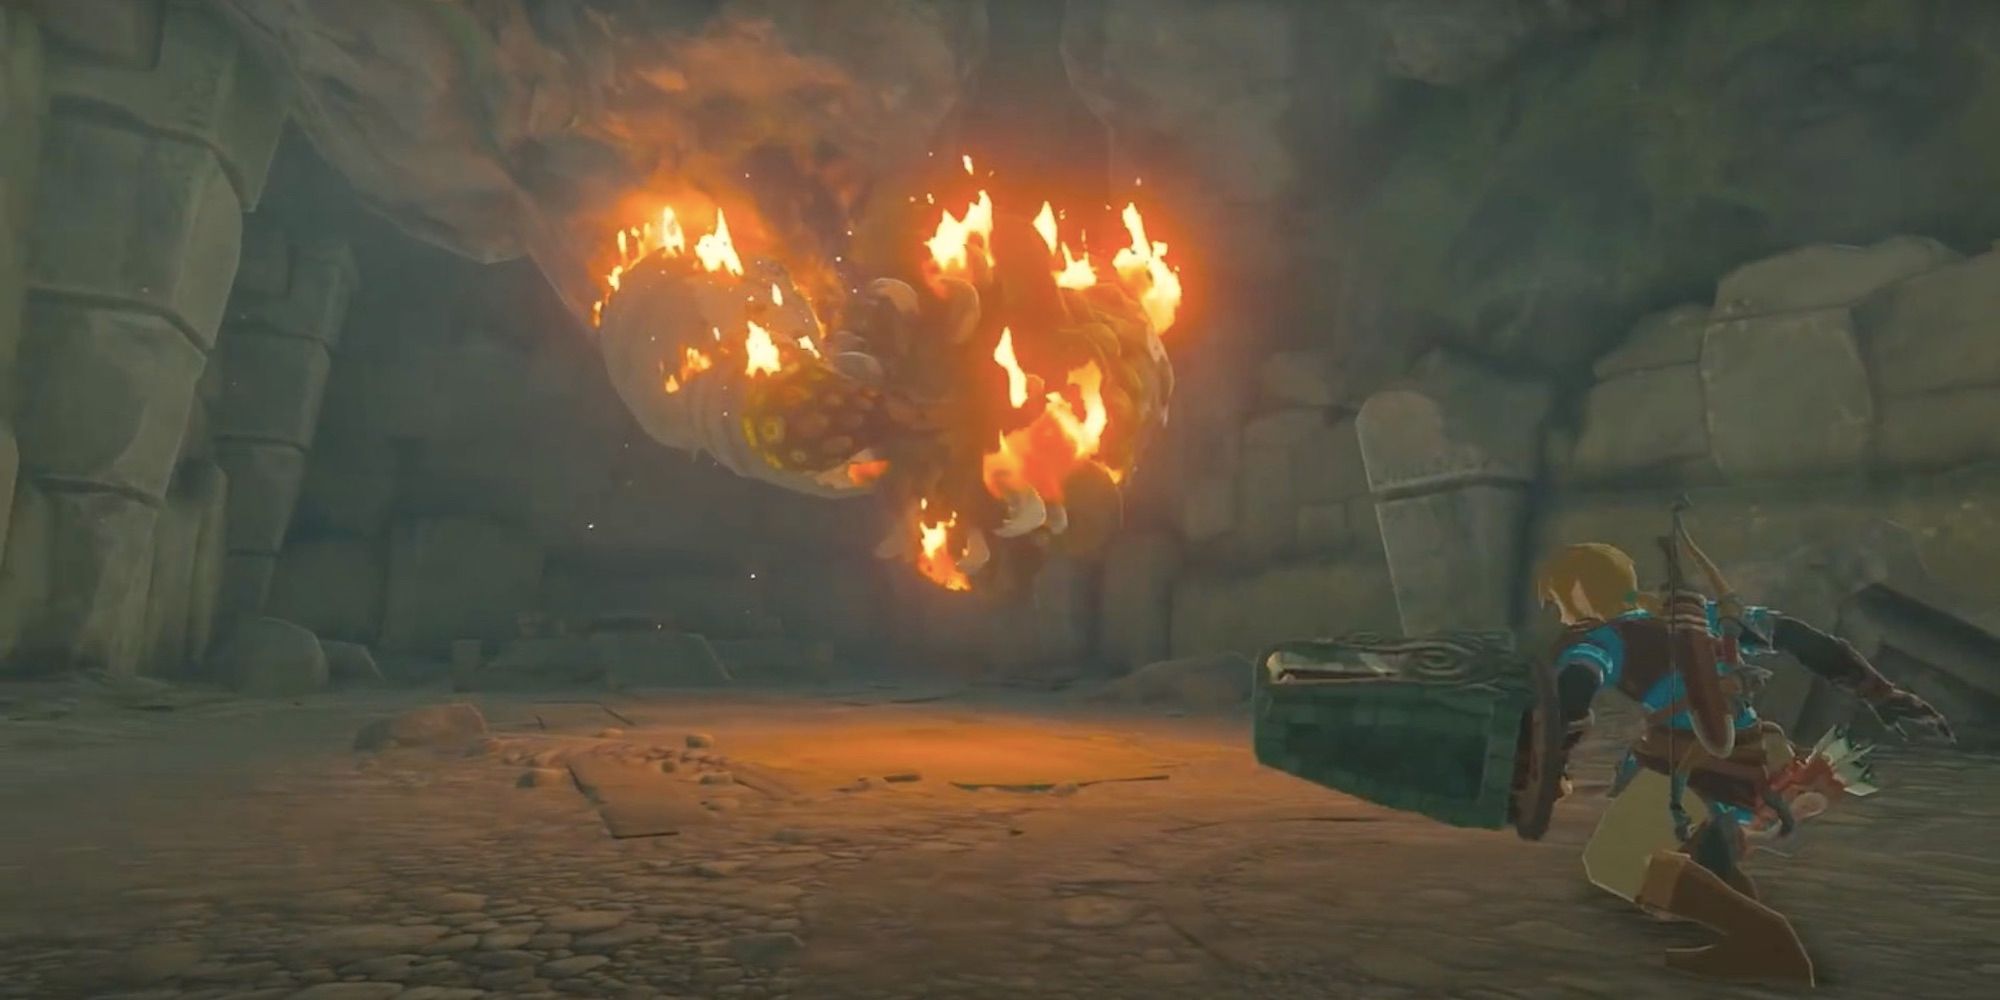 10 Details Everyone Missed In The E3 2021 Breath Of The Wild Sequel Trailer